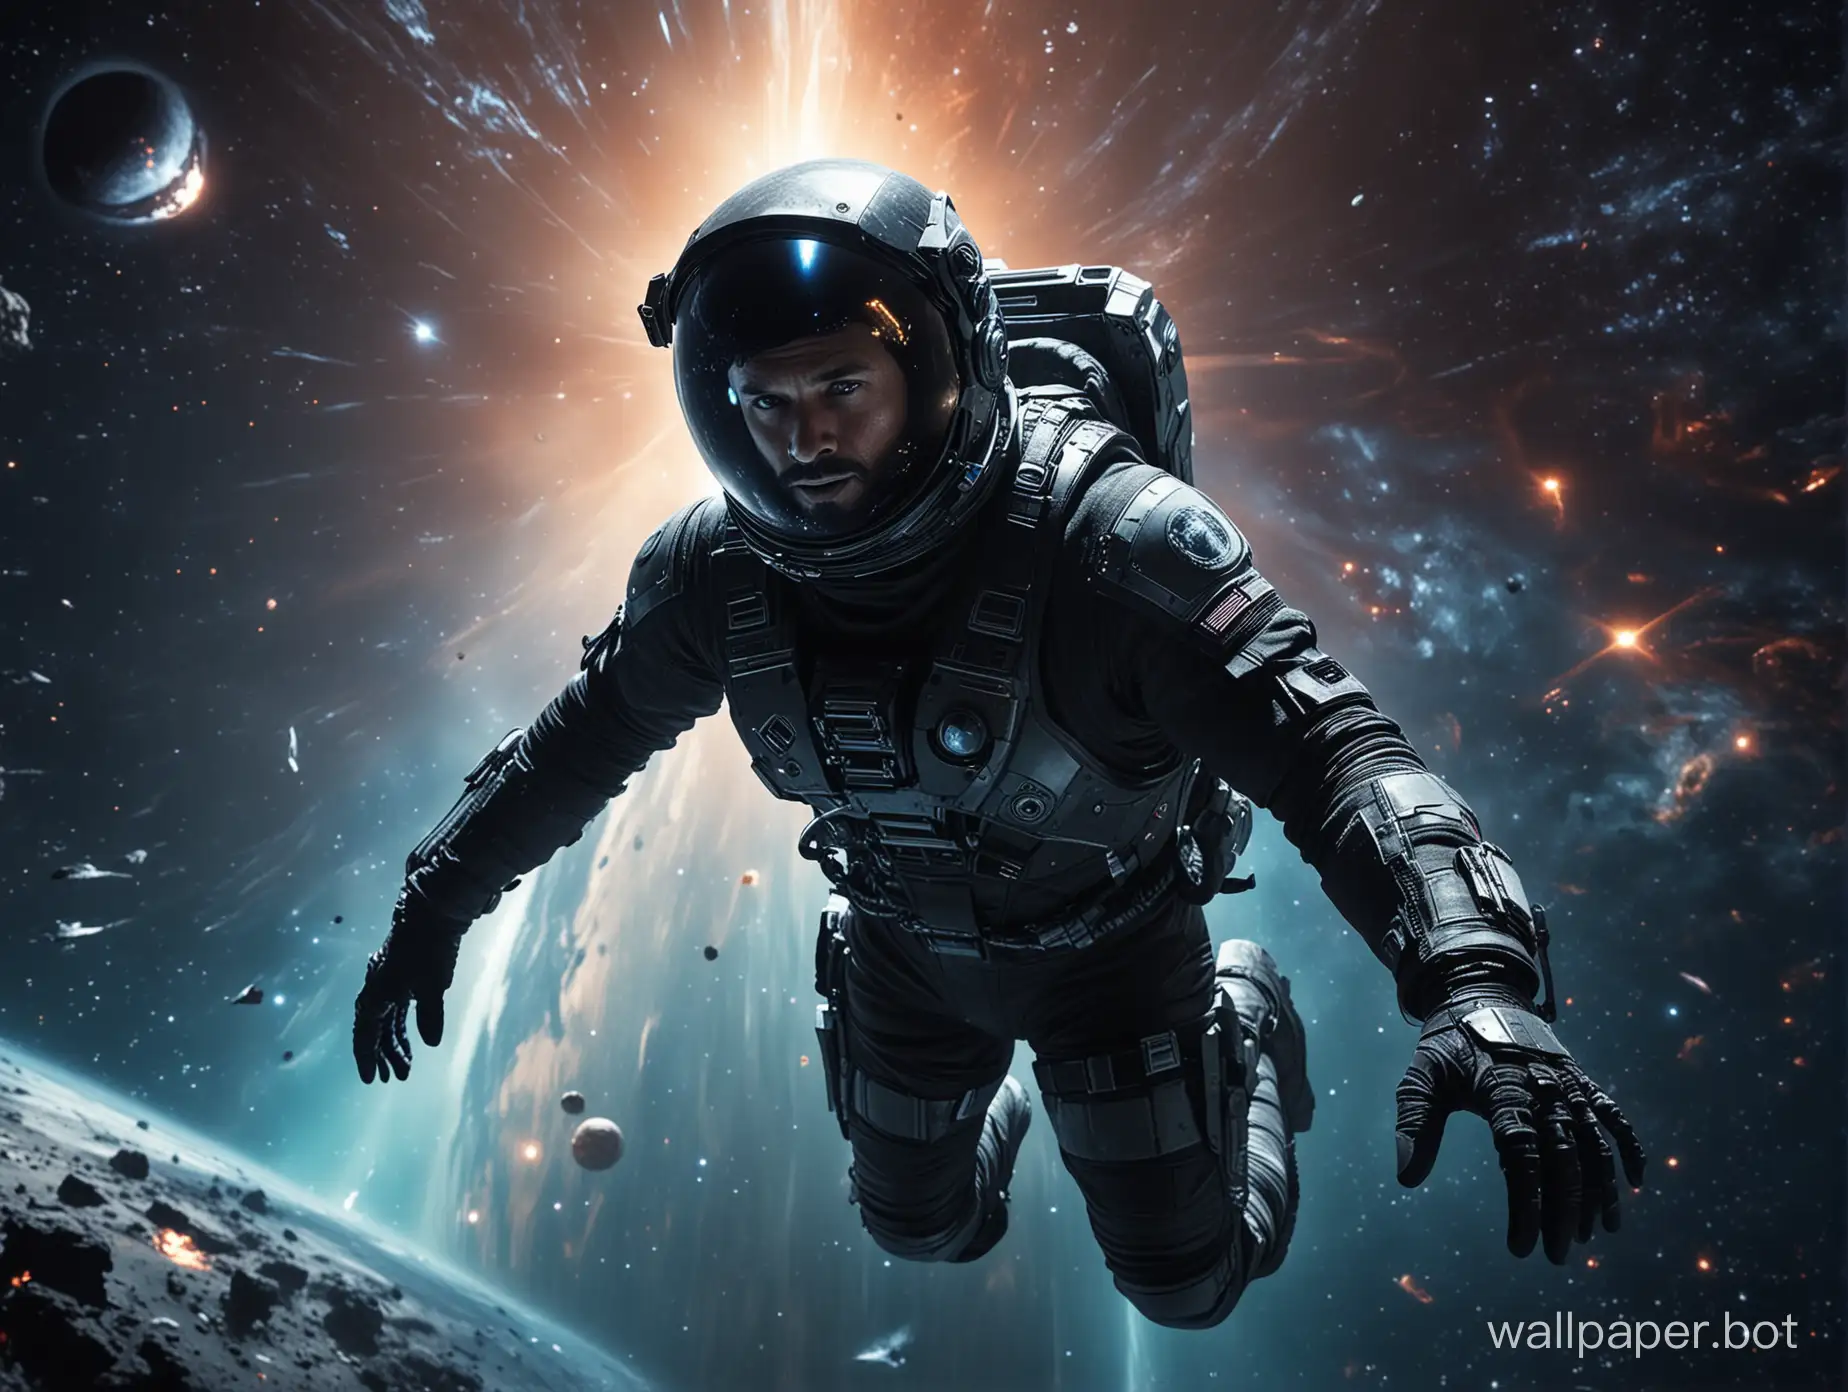 Dramatic scene from TV Show "The Expanse". Macro view of a man in futuristic space suit floating in space, reaching for the spaceship in the distance. In the background is a black hole. space is filled with stars.